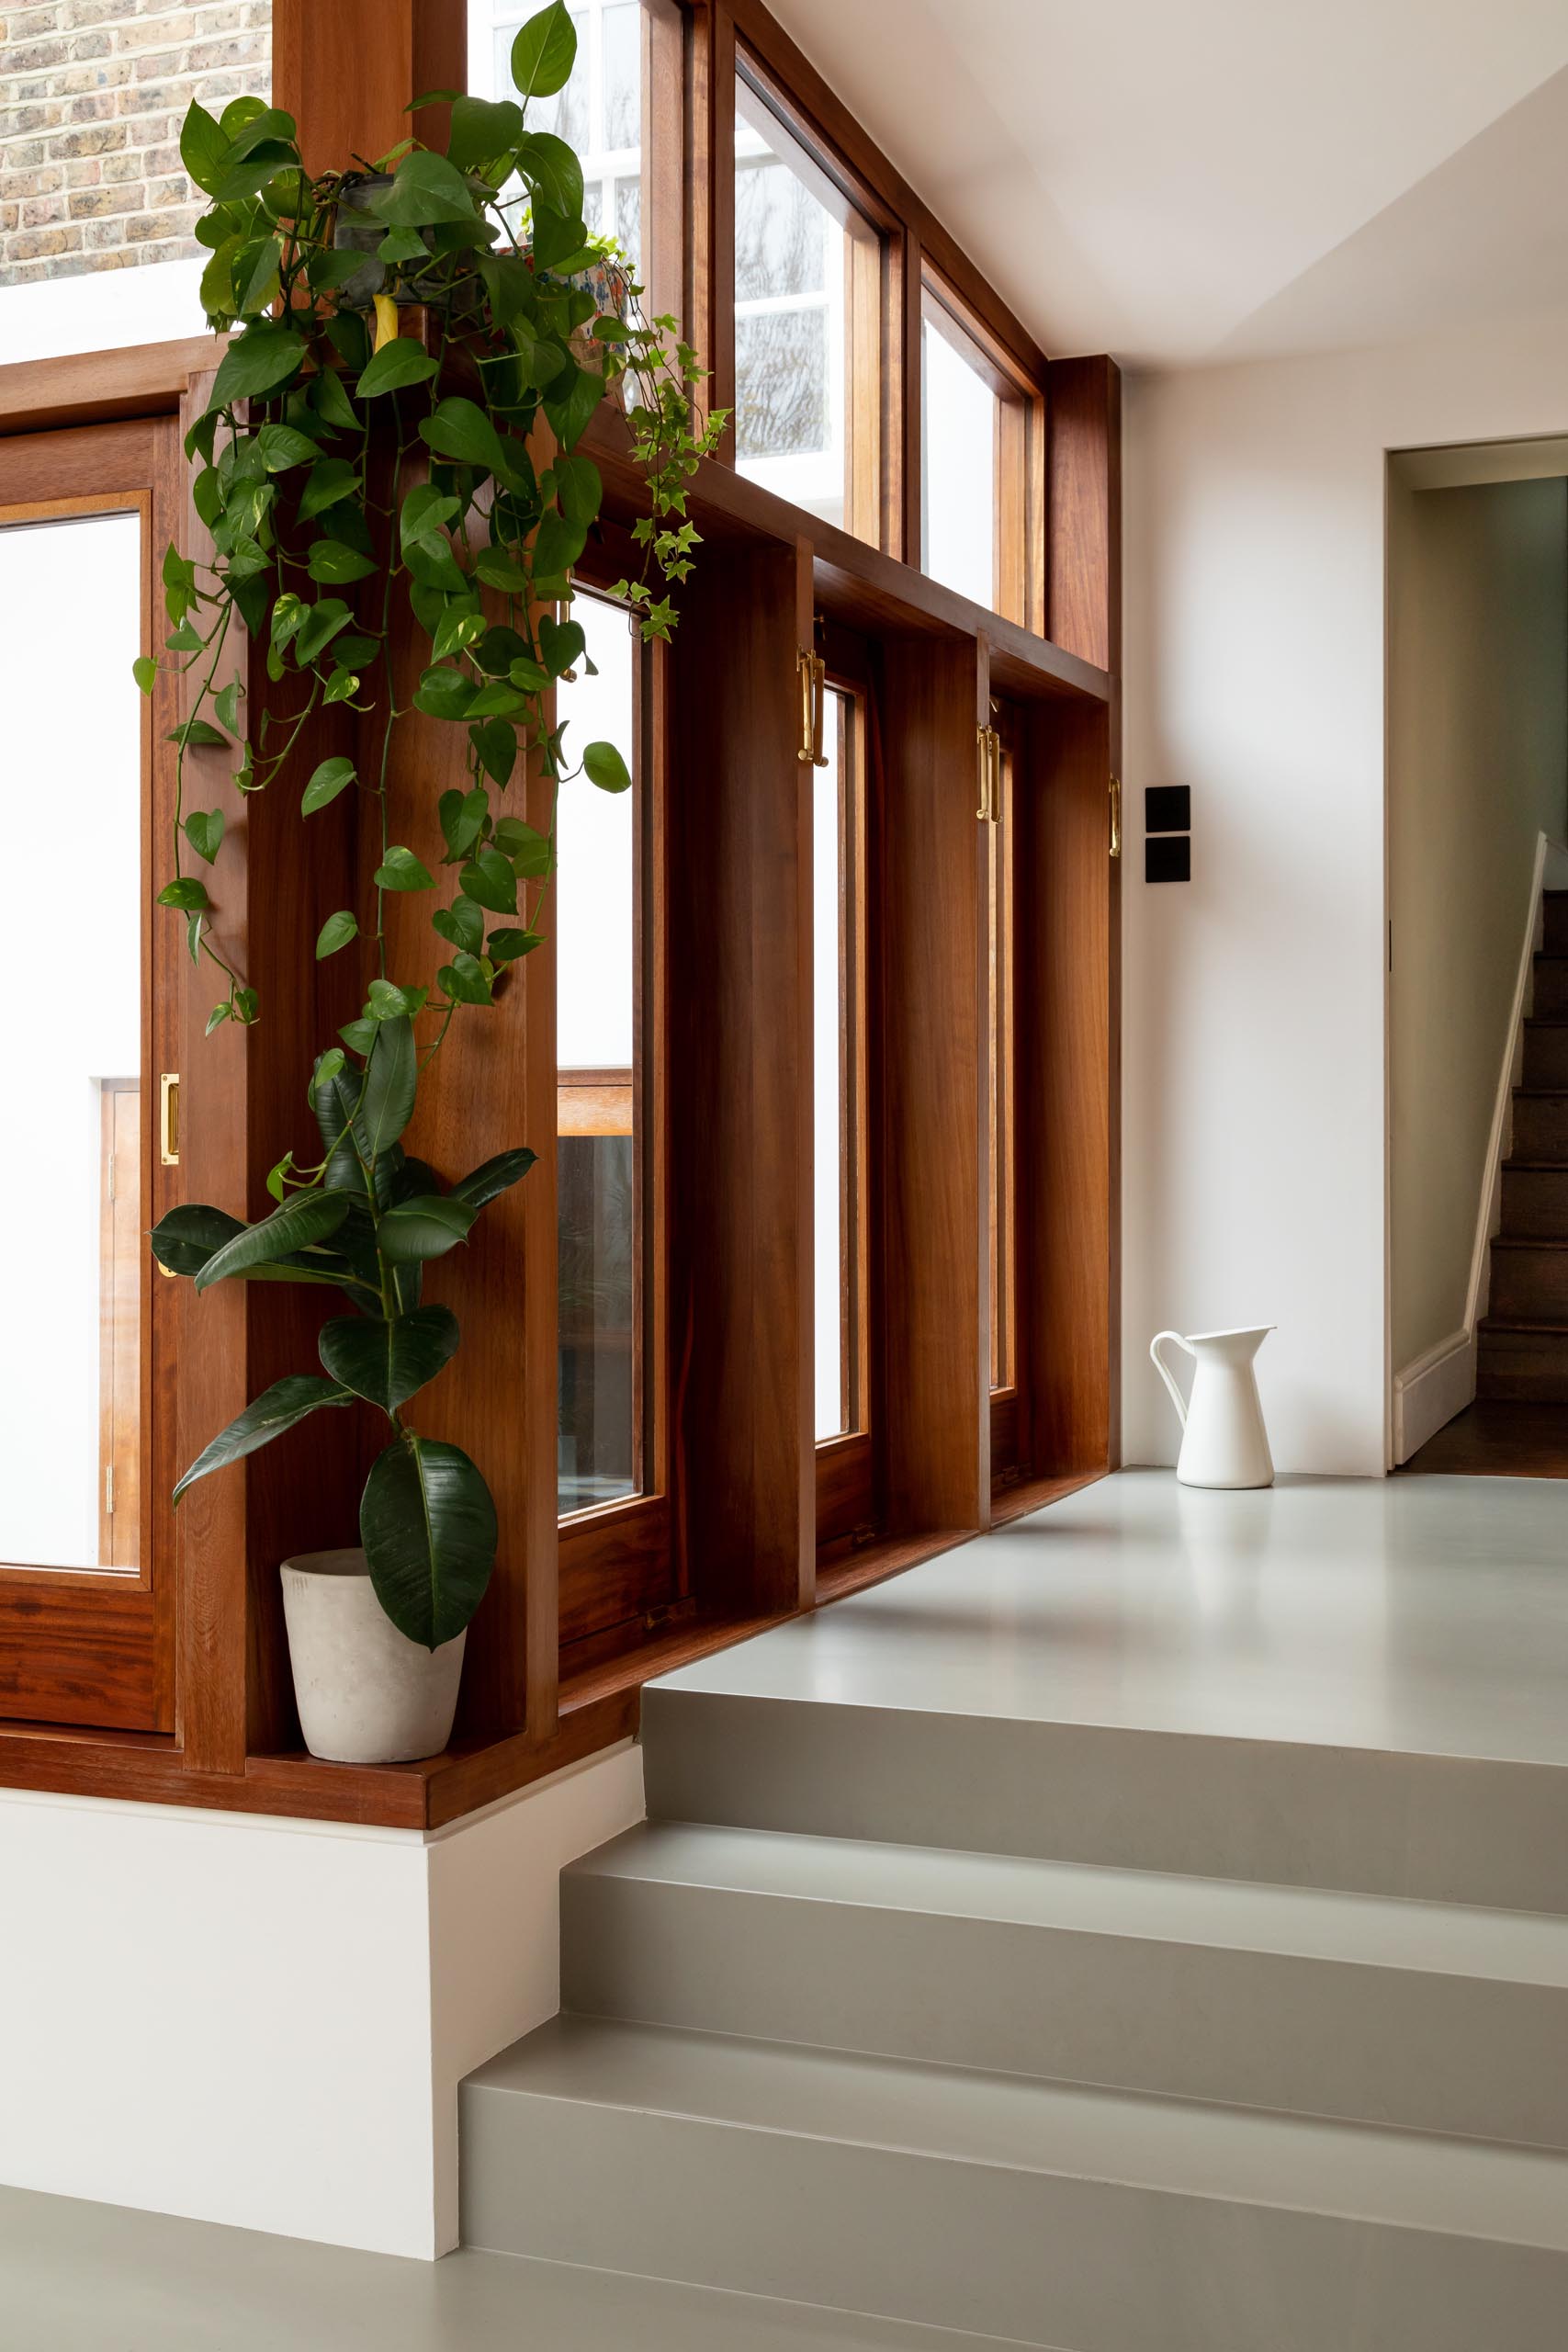 The thick wood window and door frames of a modern extension add a warmth to the interior.